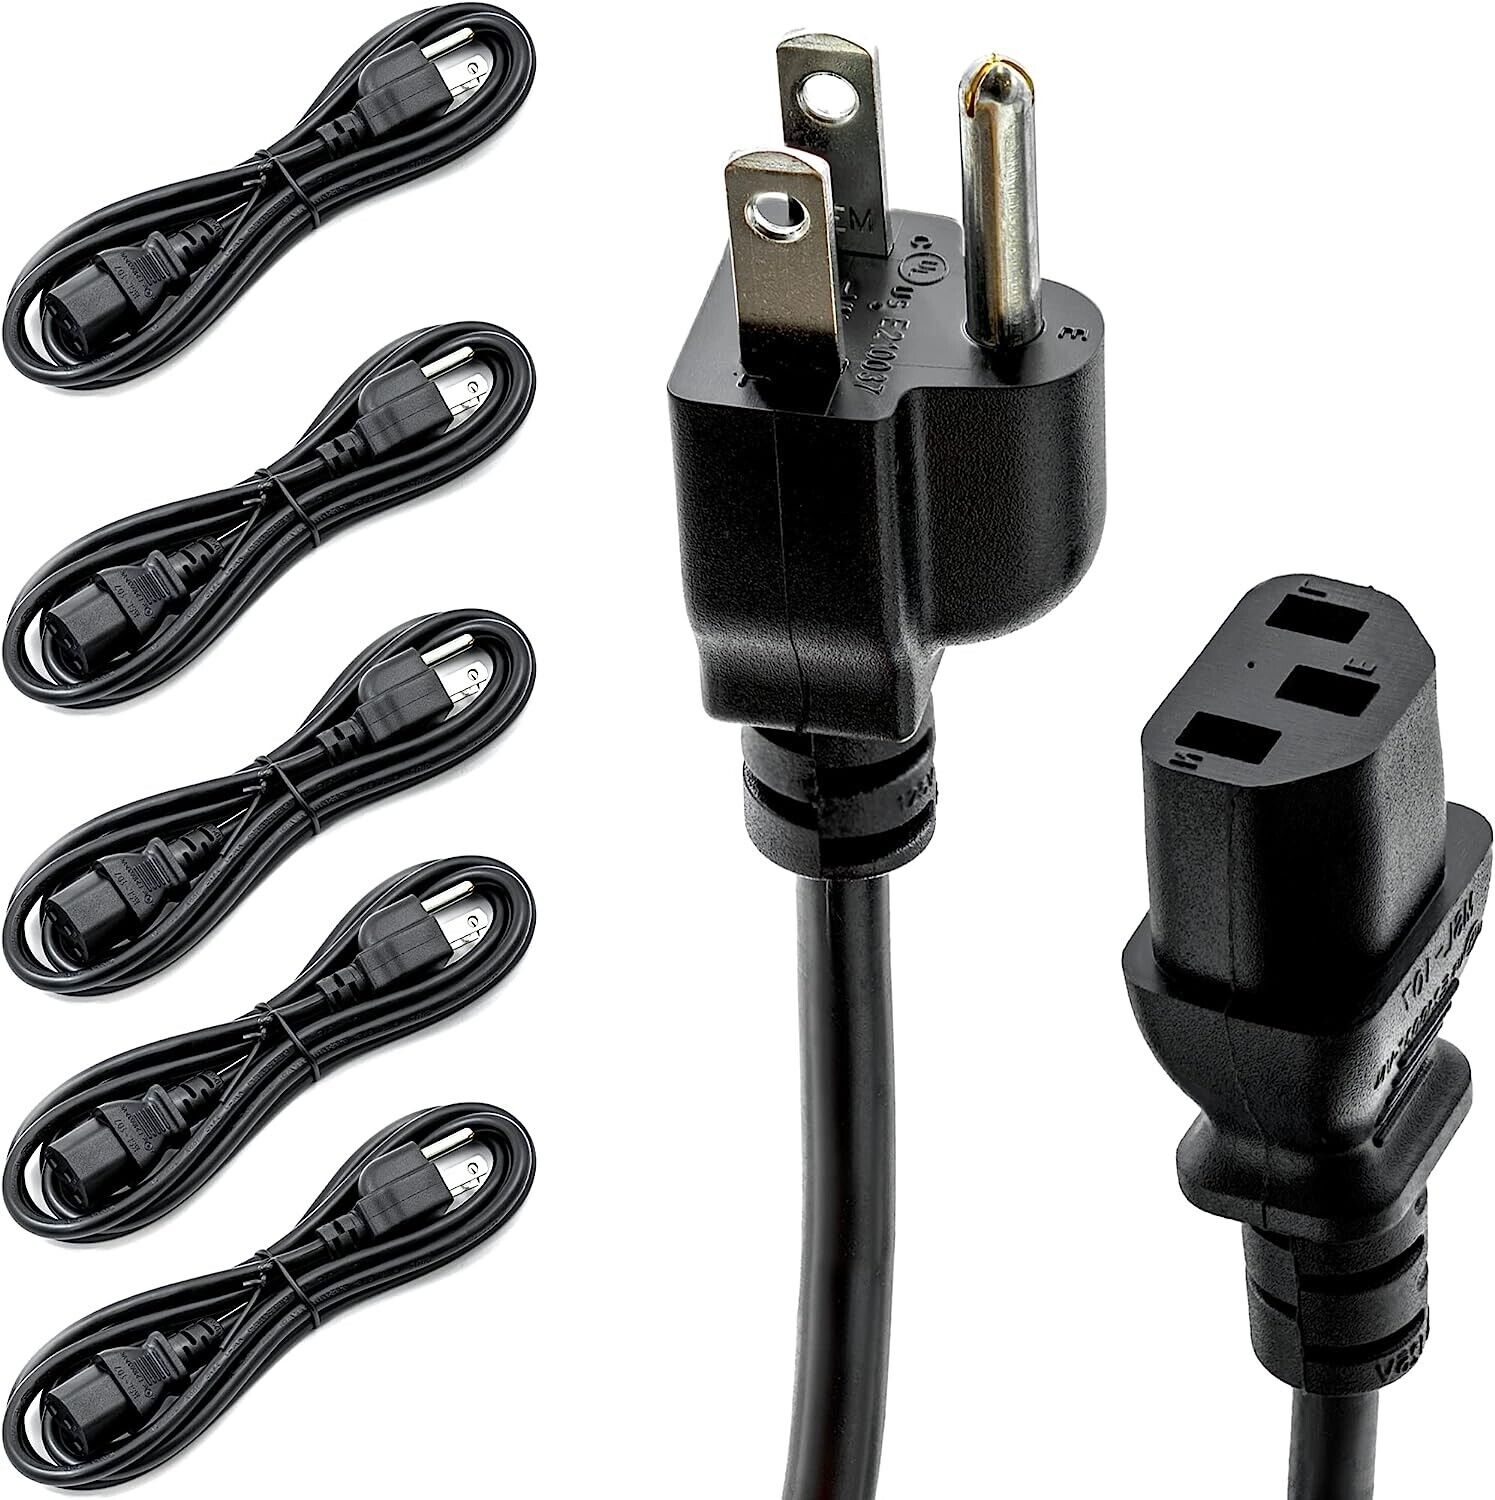 5 Pack of 6 foot 18/3 SVT NEMA 5-15P to IEC 320 C13 Replacement cords